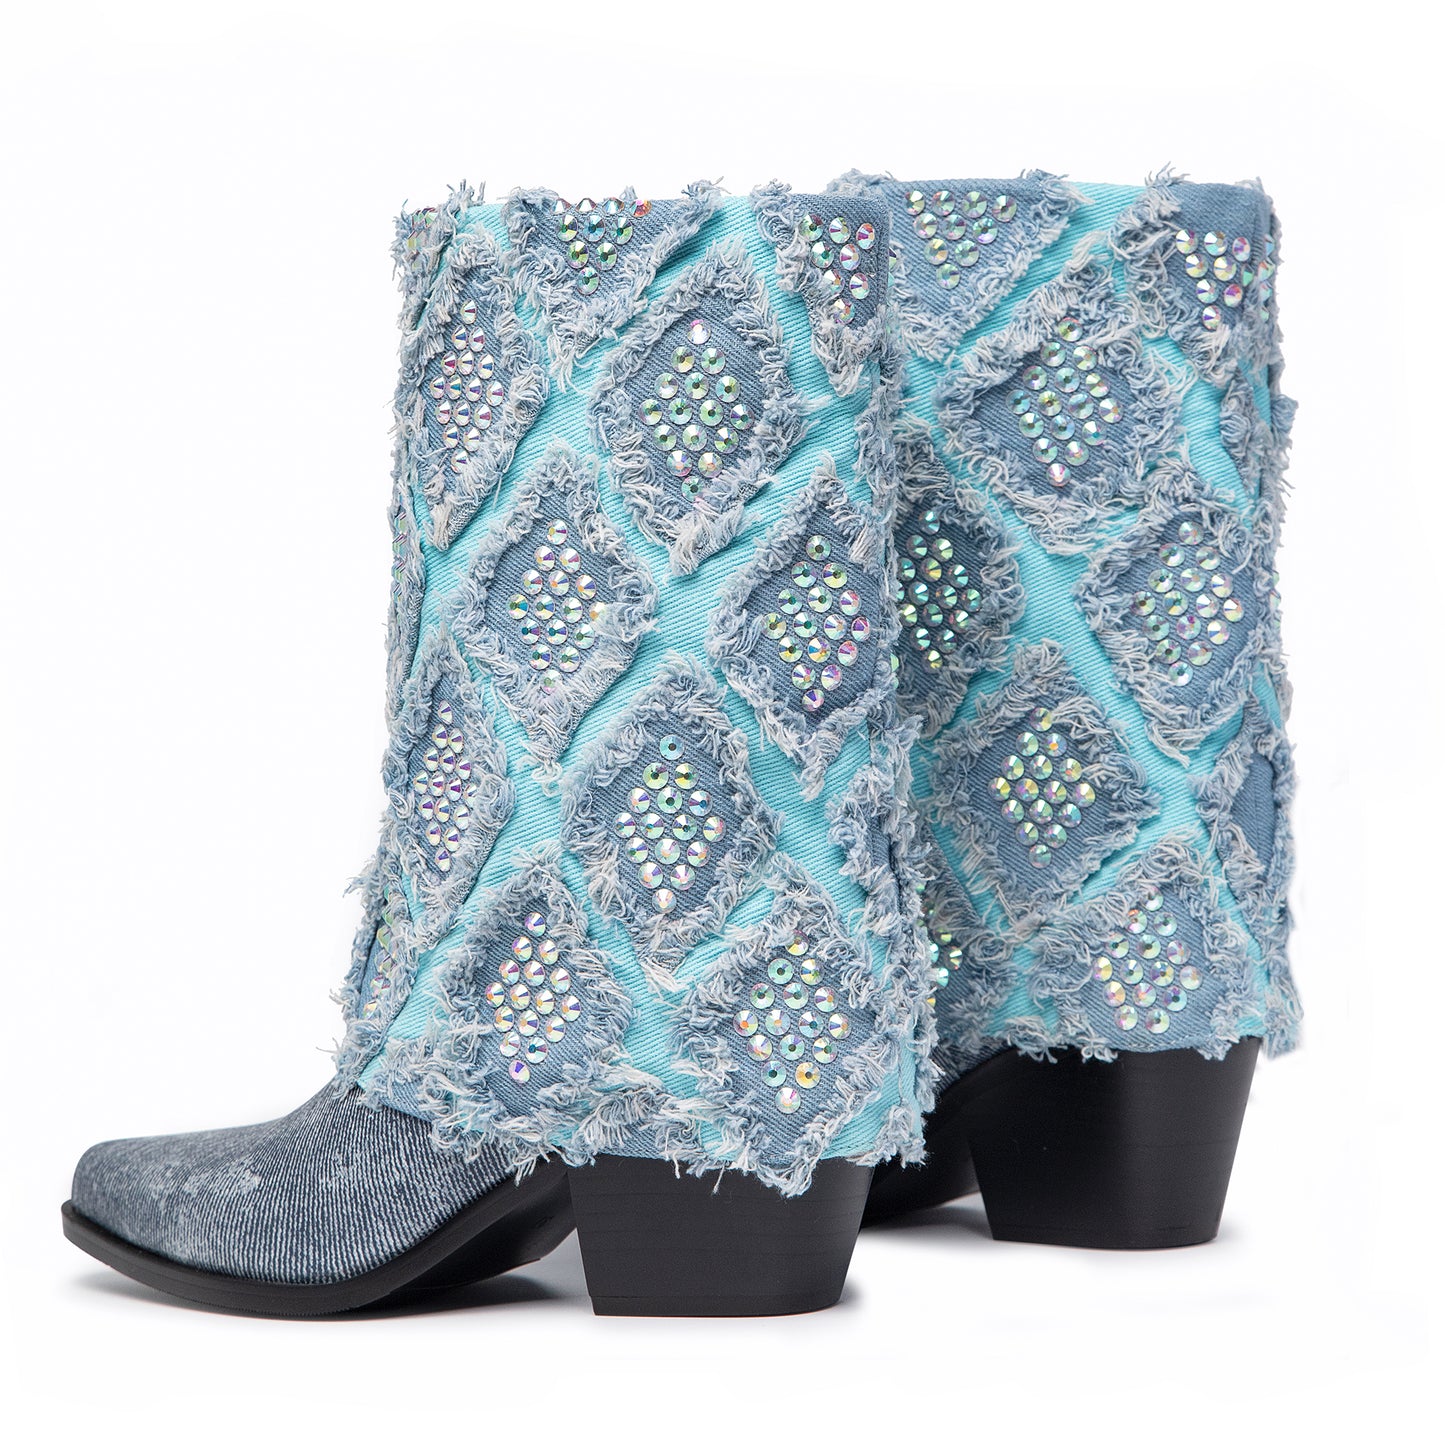 Omine Cowgirl Boots for Women Western Embroidered Washed Gingham Denim Cowgirl Boots Blue Mid Wide Calf Boots